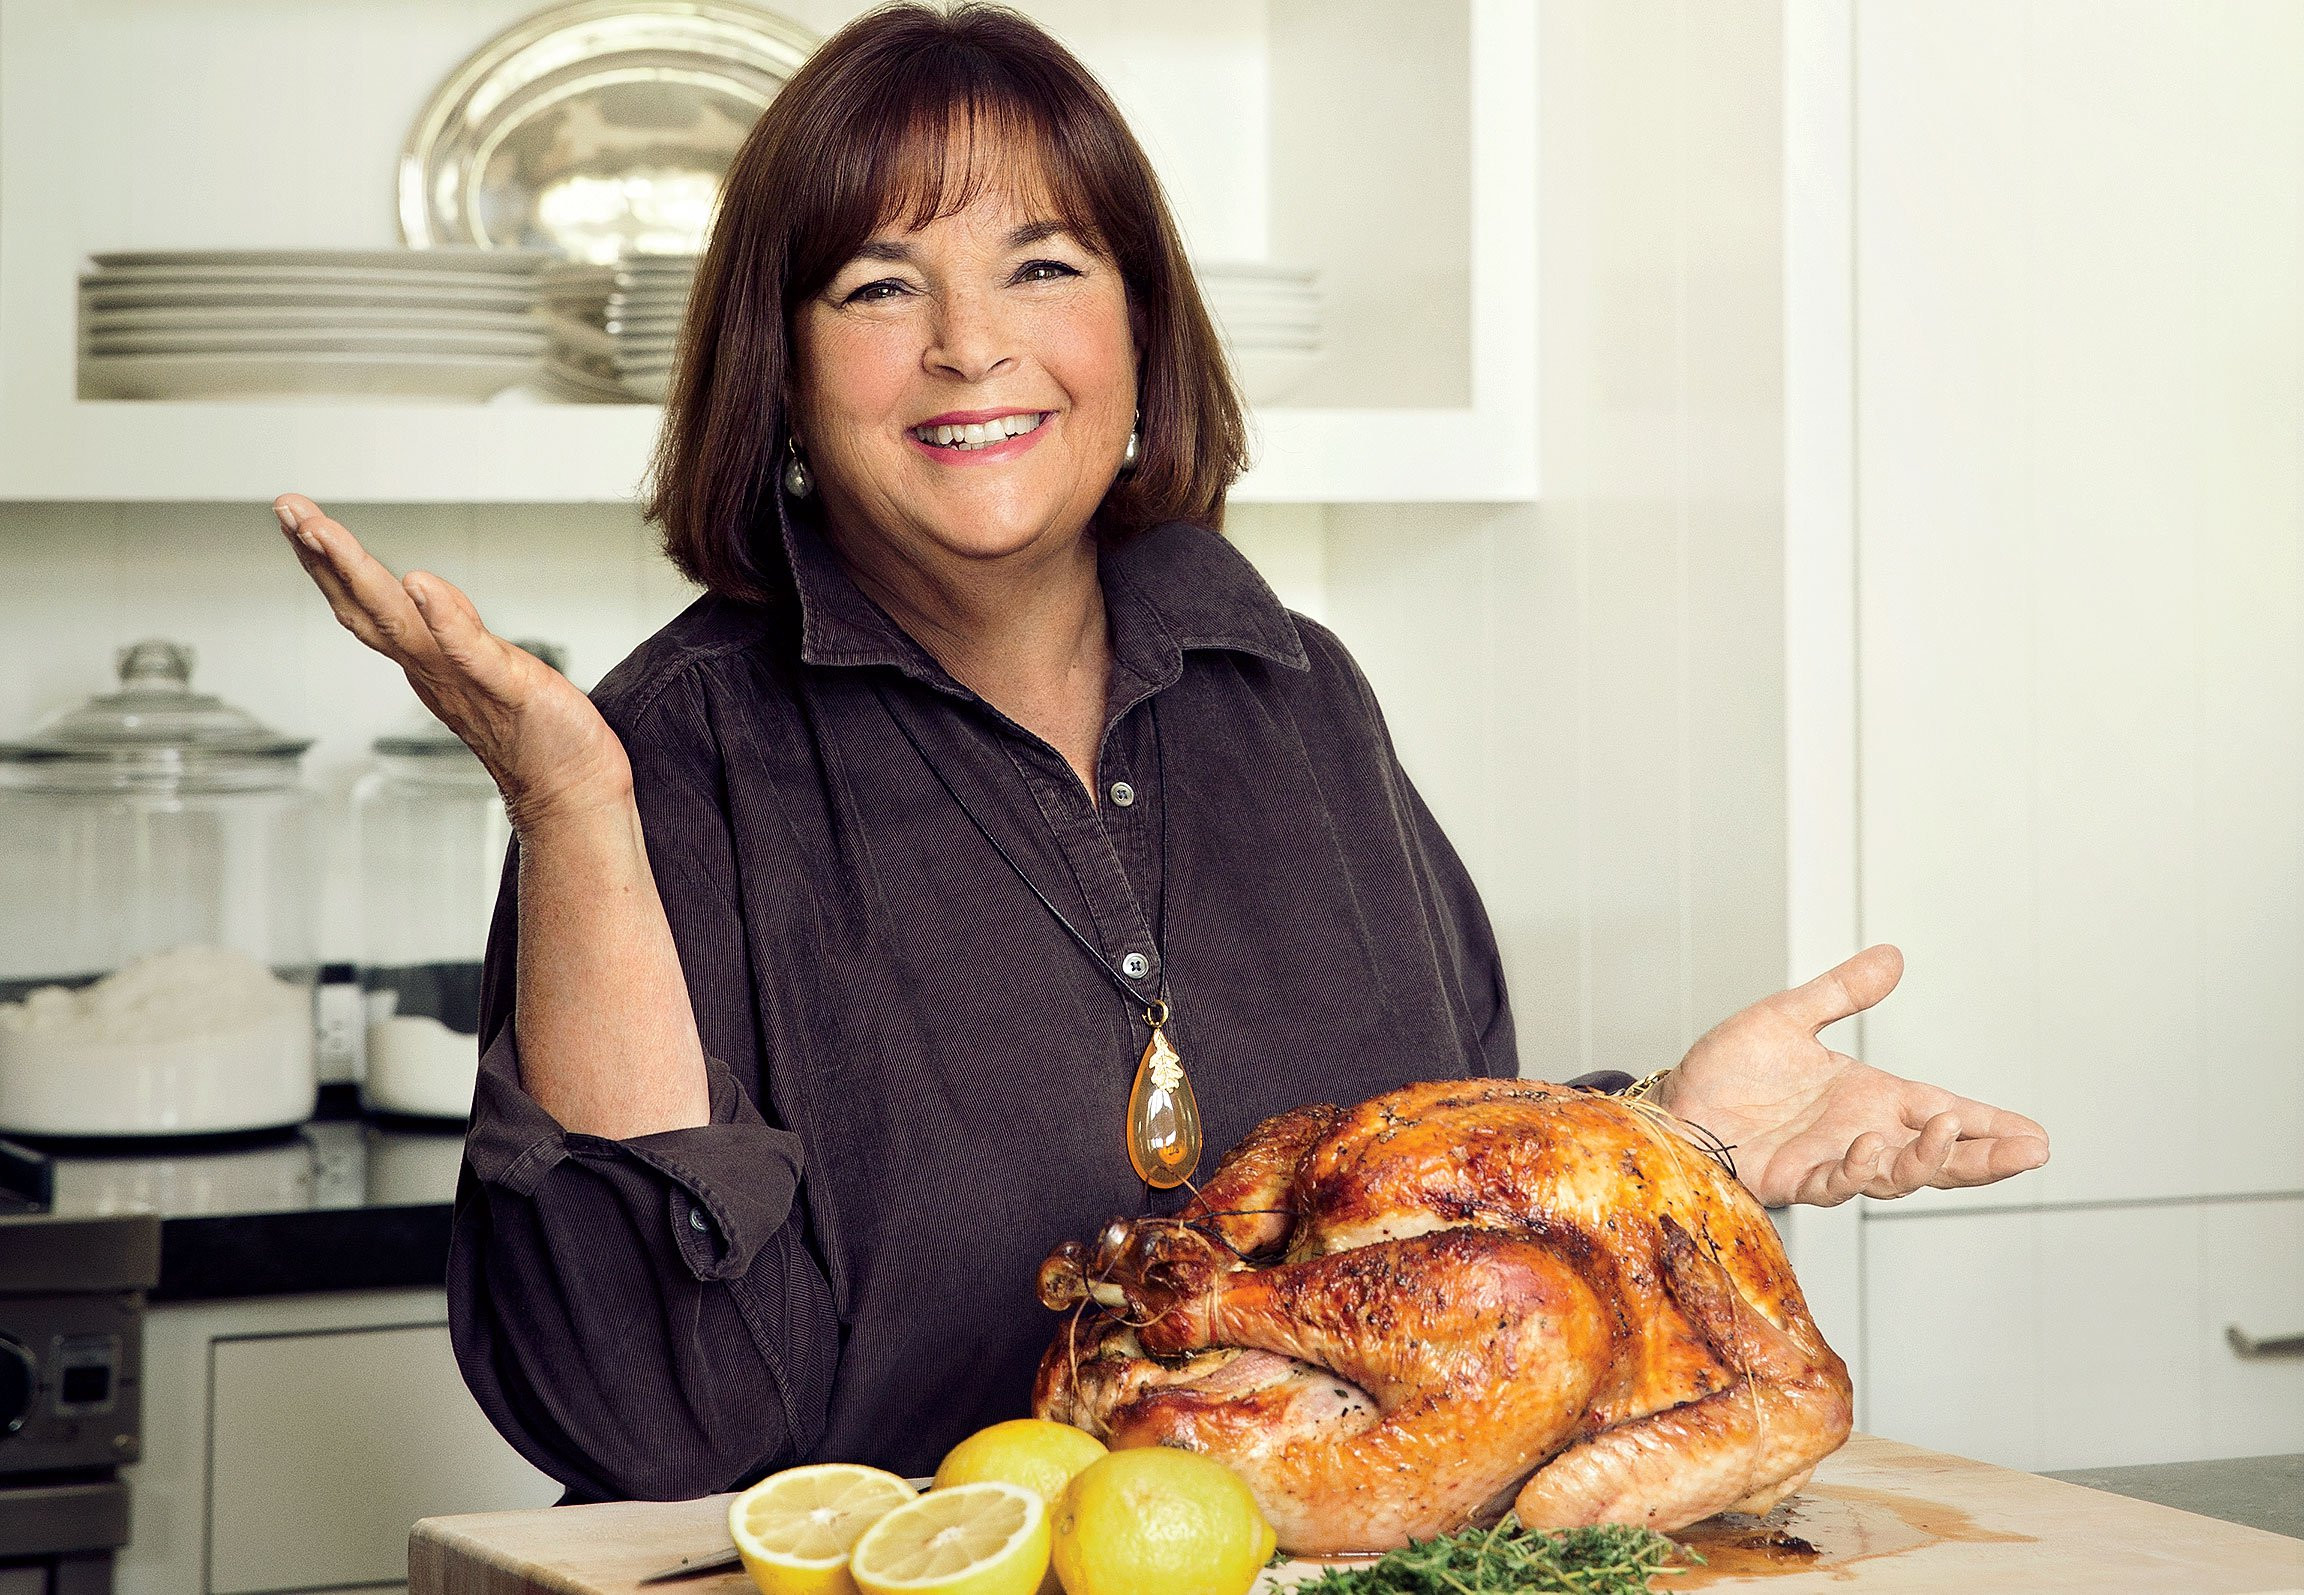 Ina Garten Thanksgiving Turkey
 Have A Make Ahead Thanksgiving With Barefoot Contessa Ina